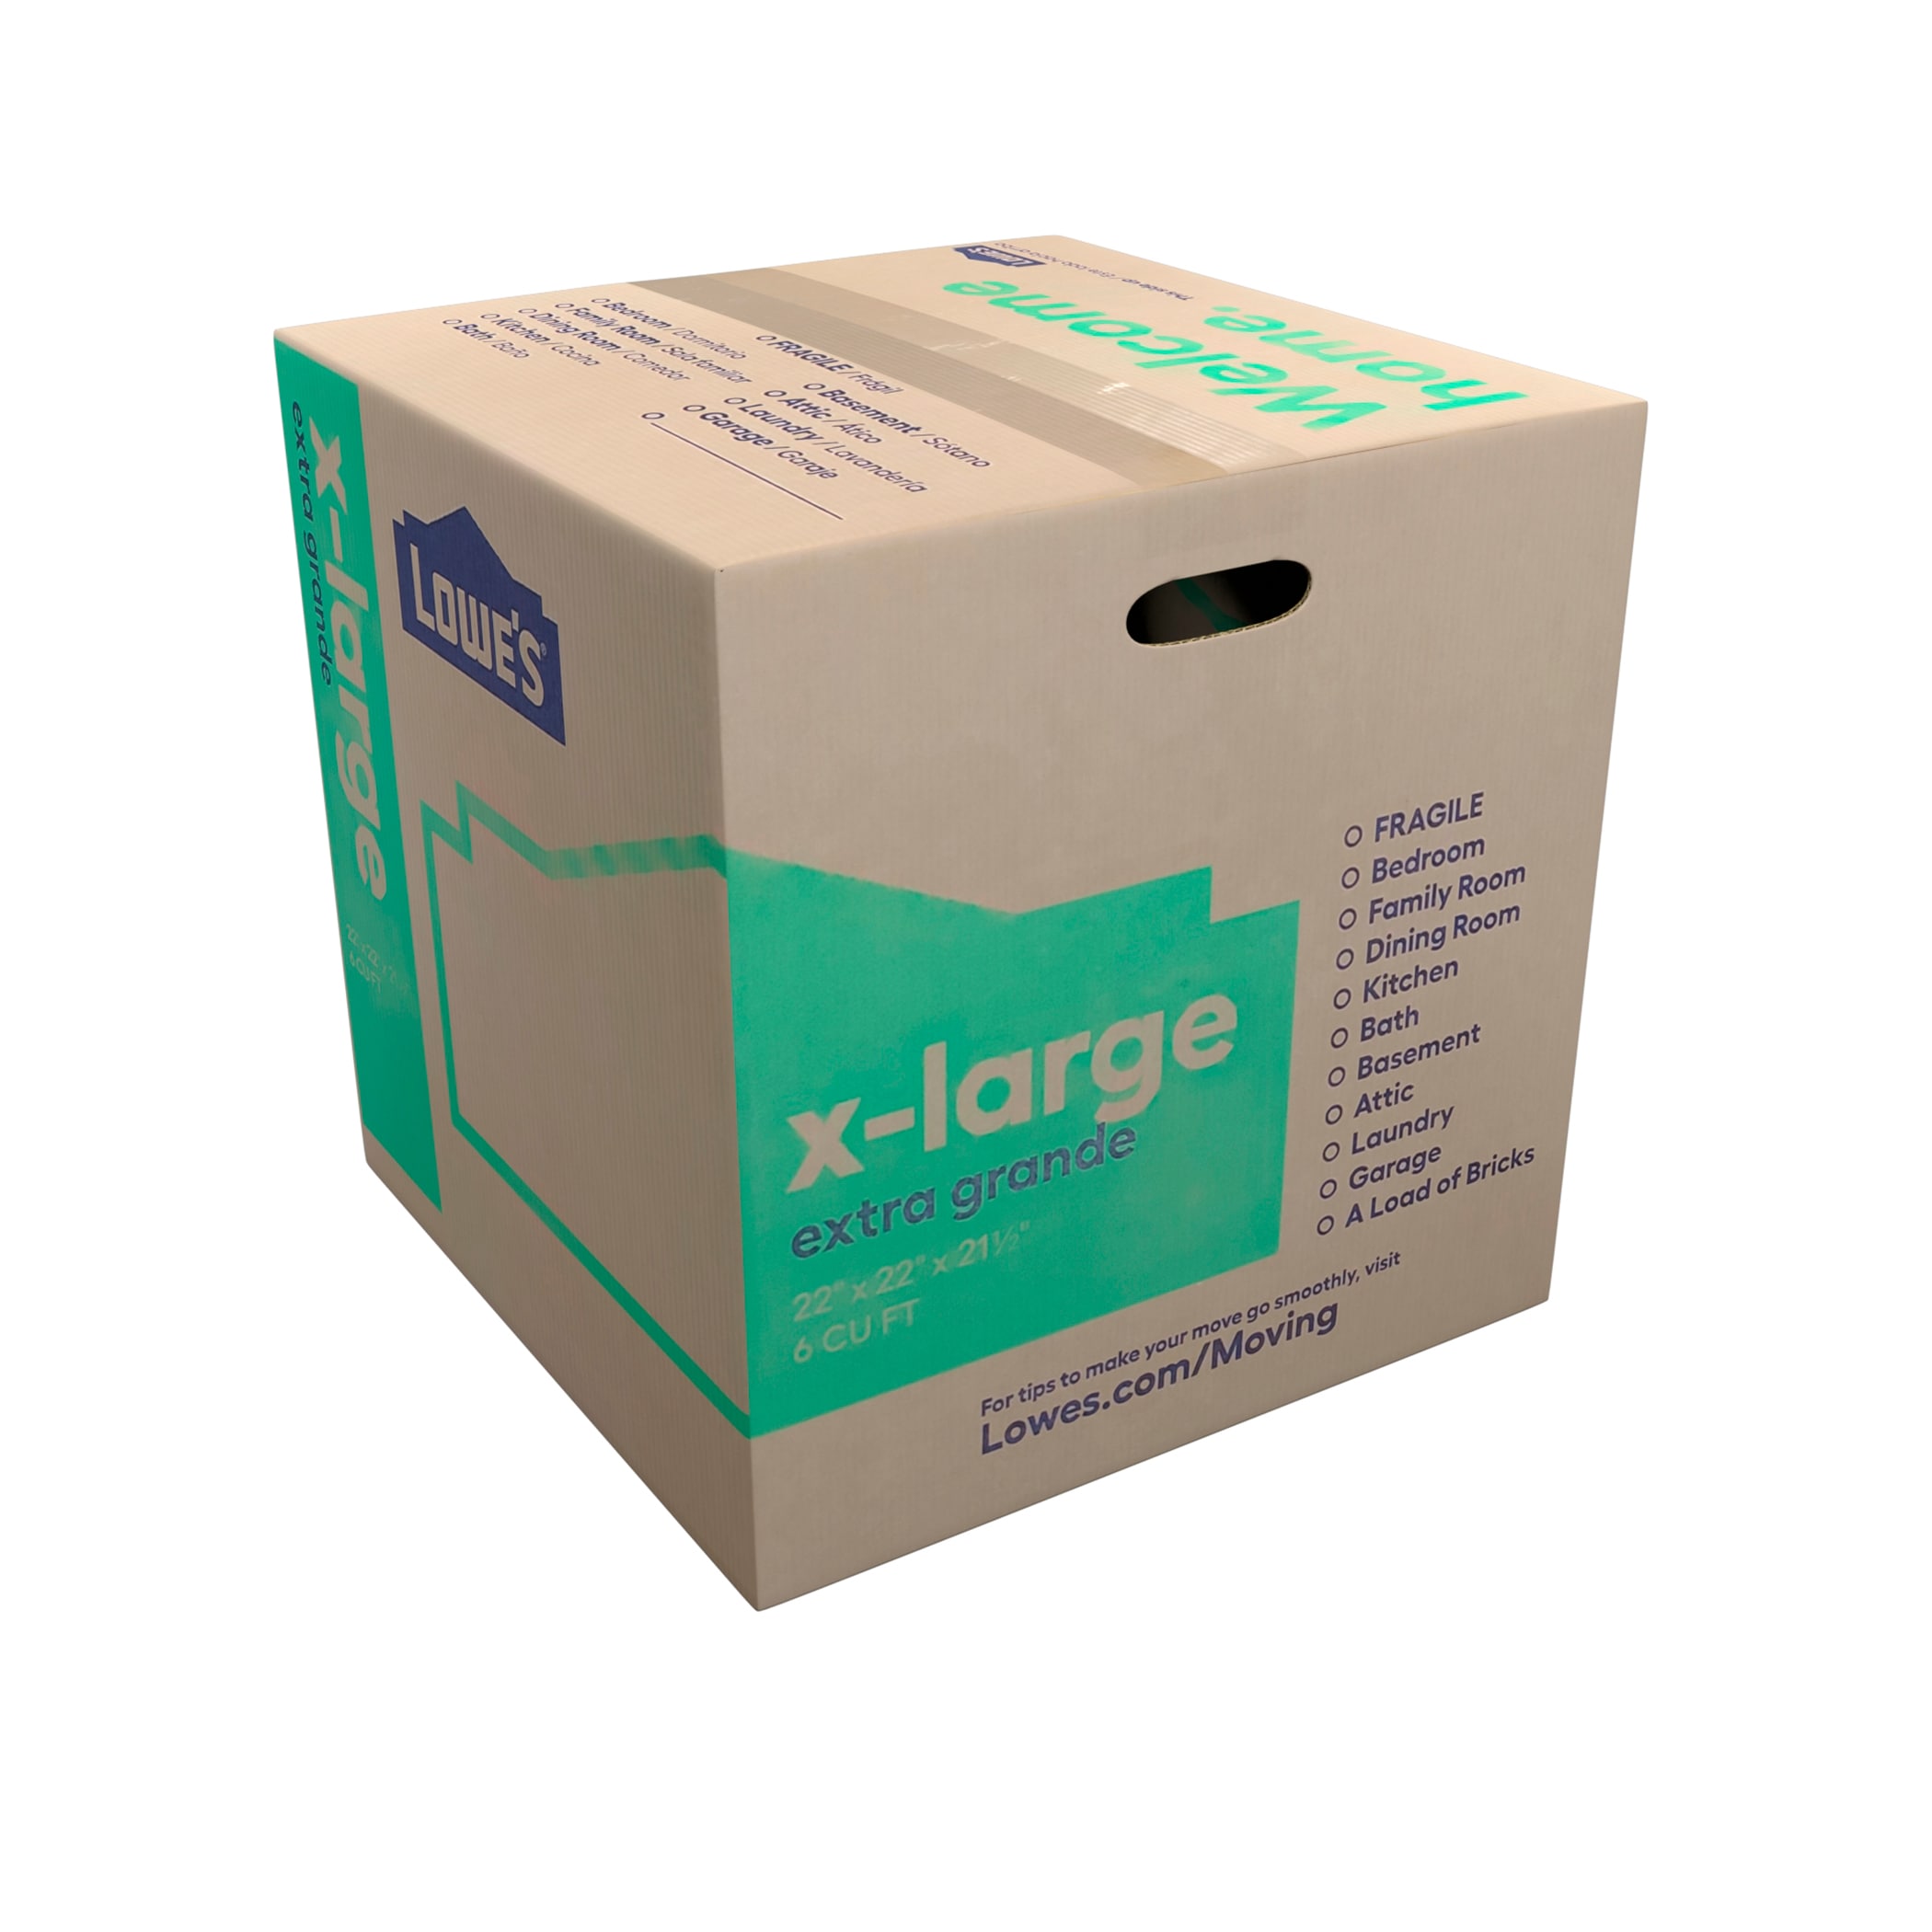 20 x Large D/W Stock Removal Cartons Boxes 22x14x14" 